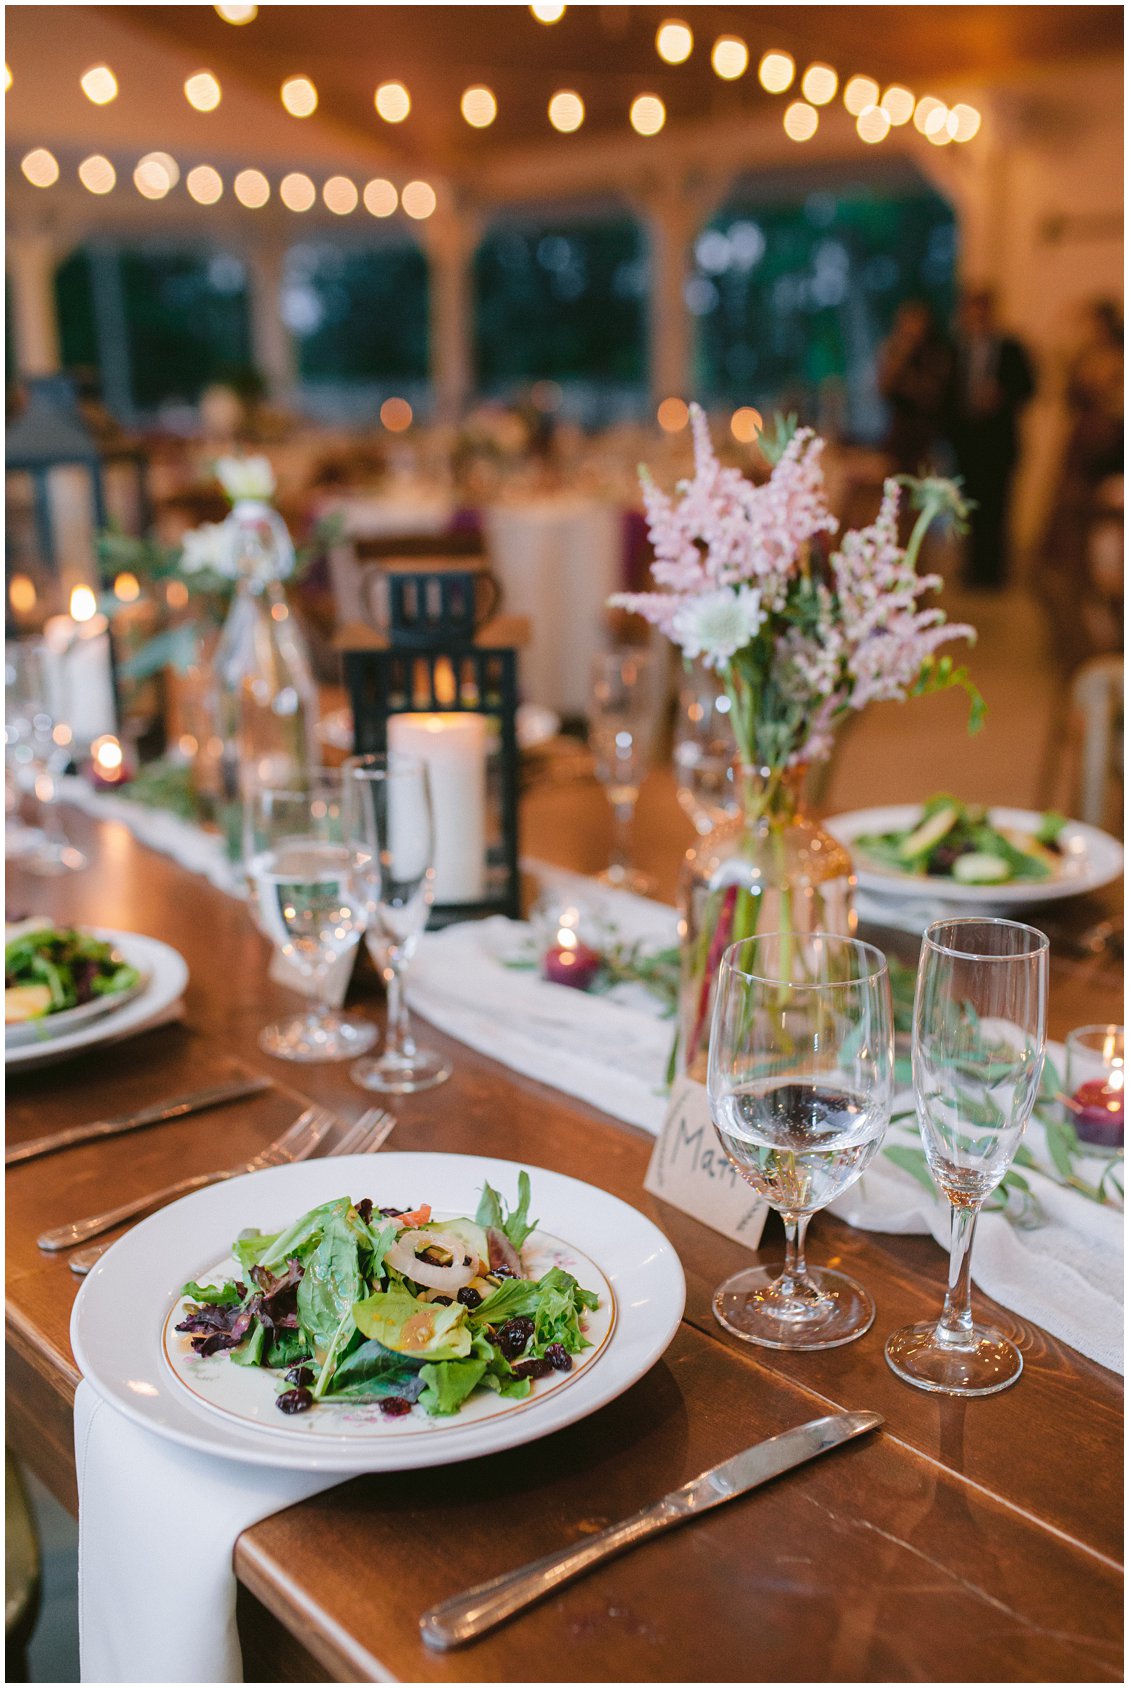 Rustic outdoor intimate wedding reception at Seven Springs Farm & Manor by Tara & Stephen of Pattengale Photography